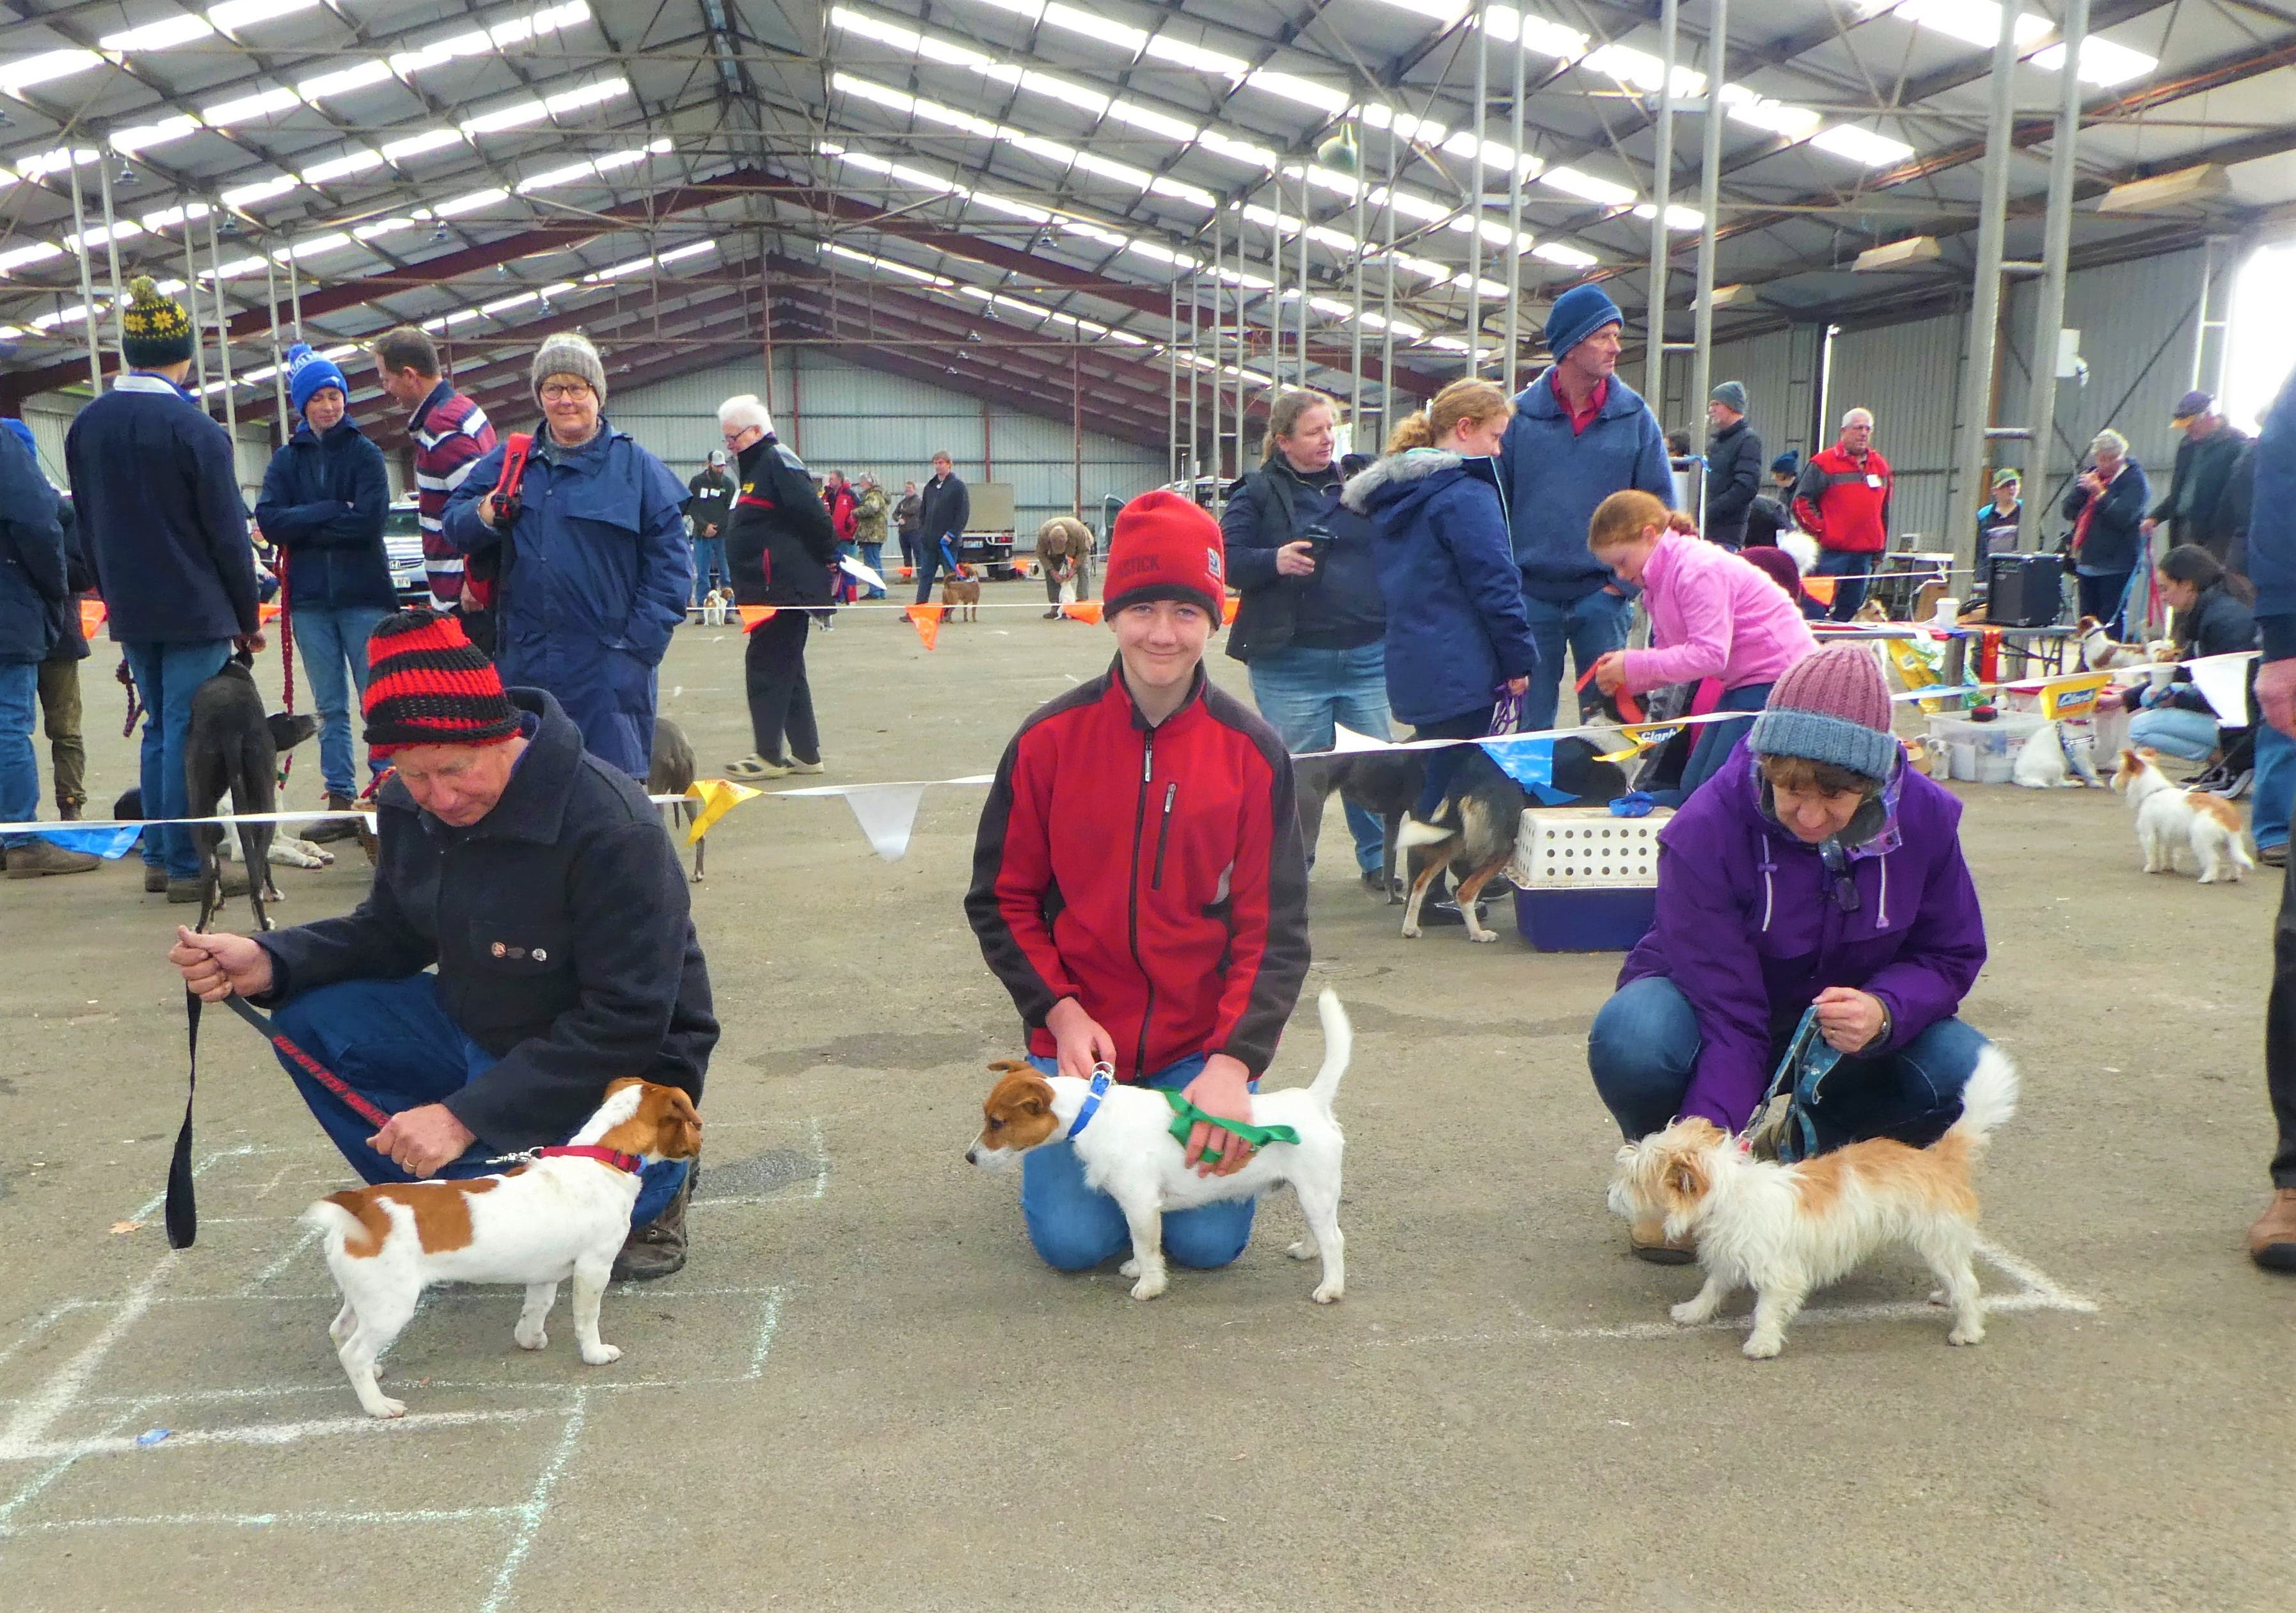 Hamilton Jack Russell Terrier and Hunting Dog Show - Accommodation Brunswick Heads